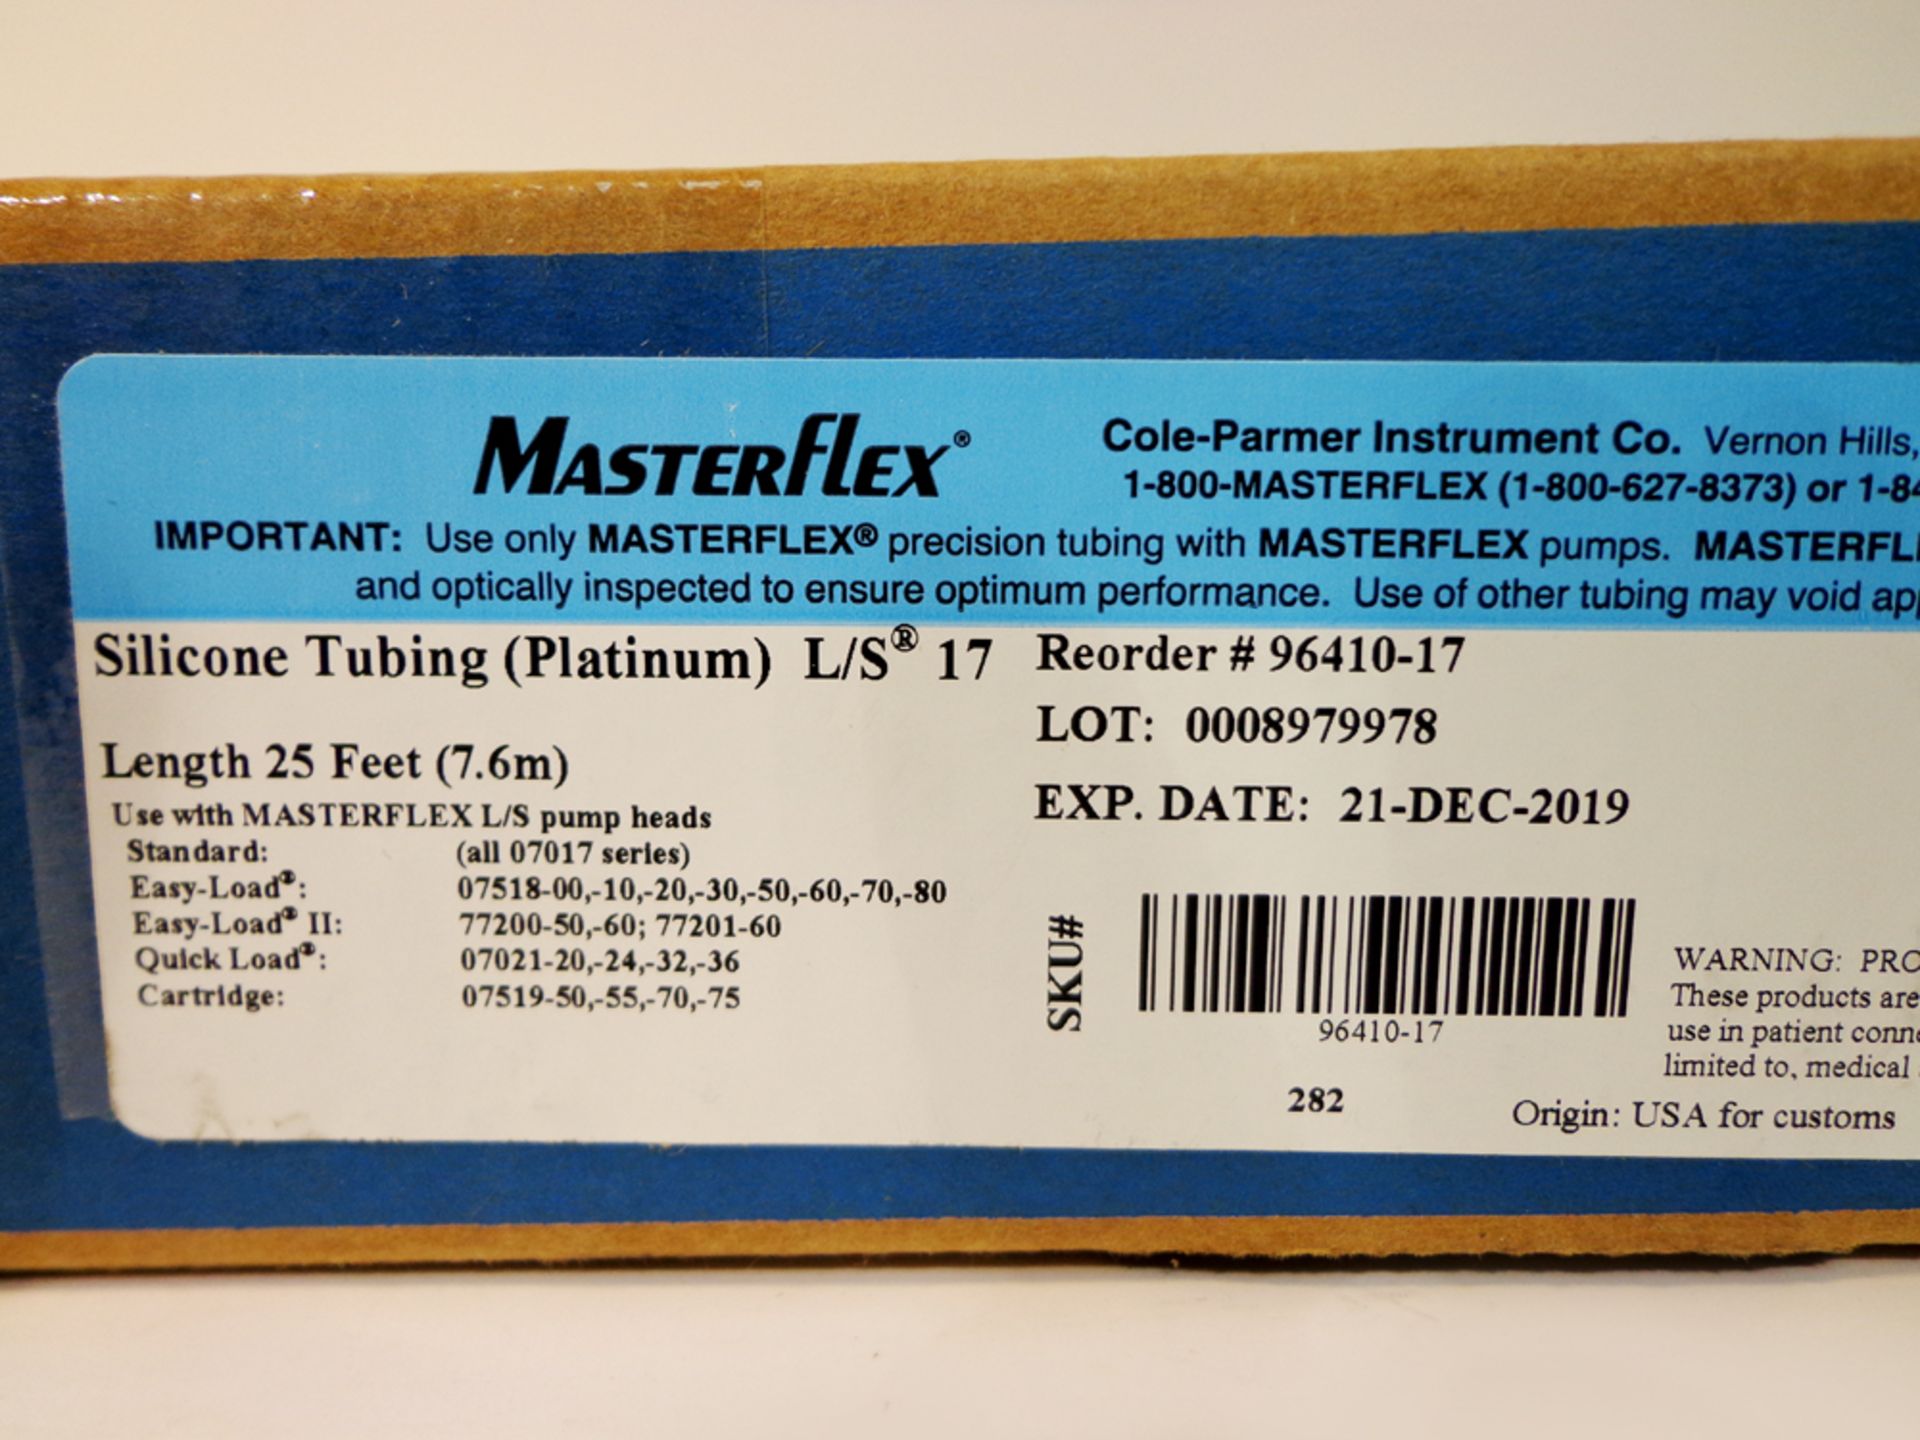 Masterflex L/S Platinum-Cured Silicone Tubing, L/S 17, 25 ft, OU-96410-17. - Image 2 of 2